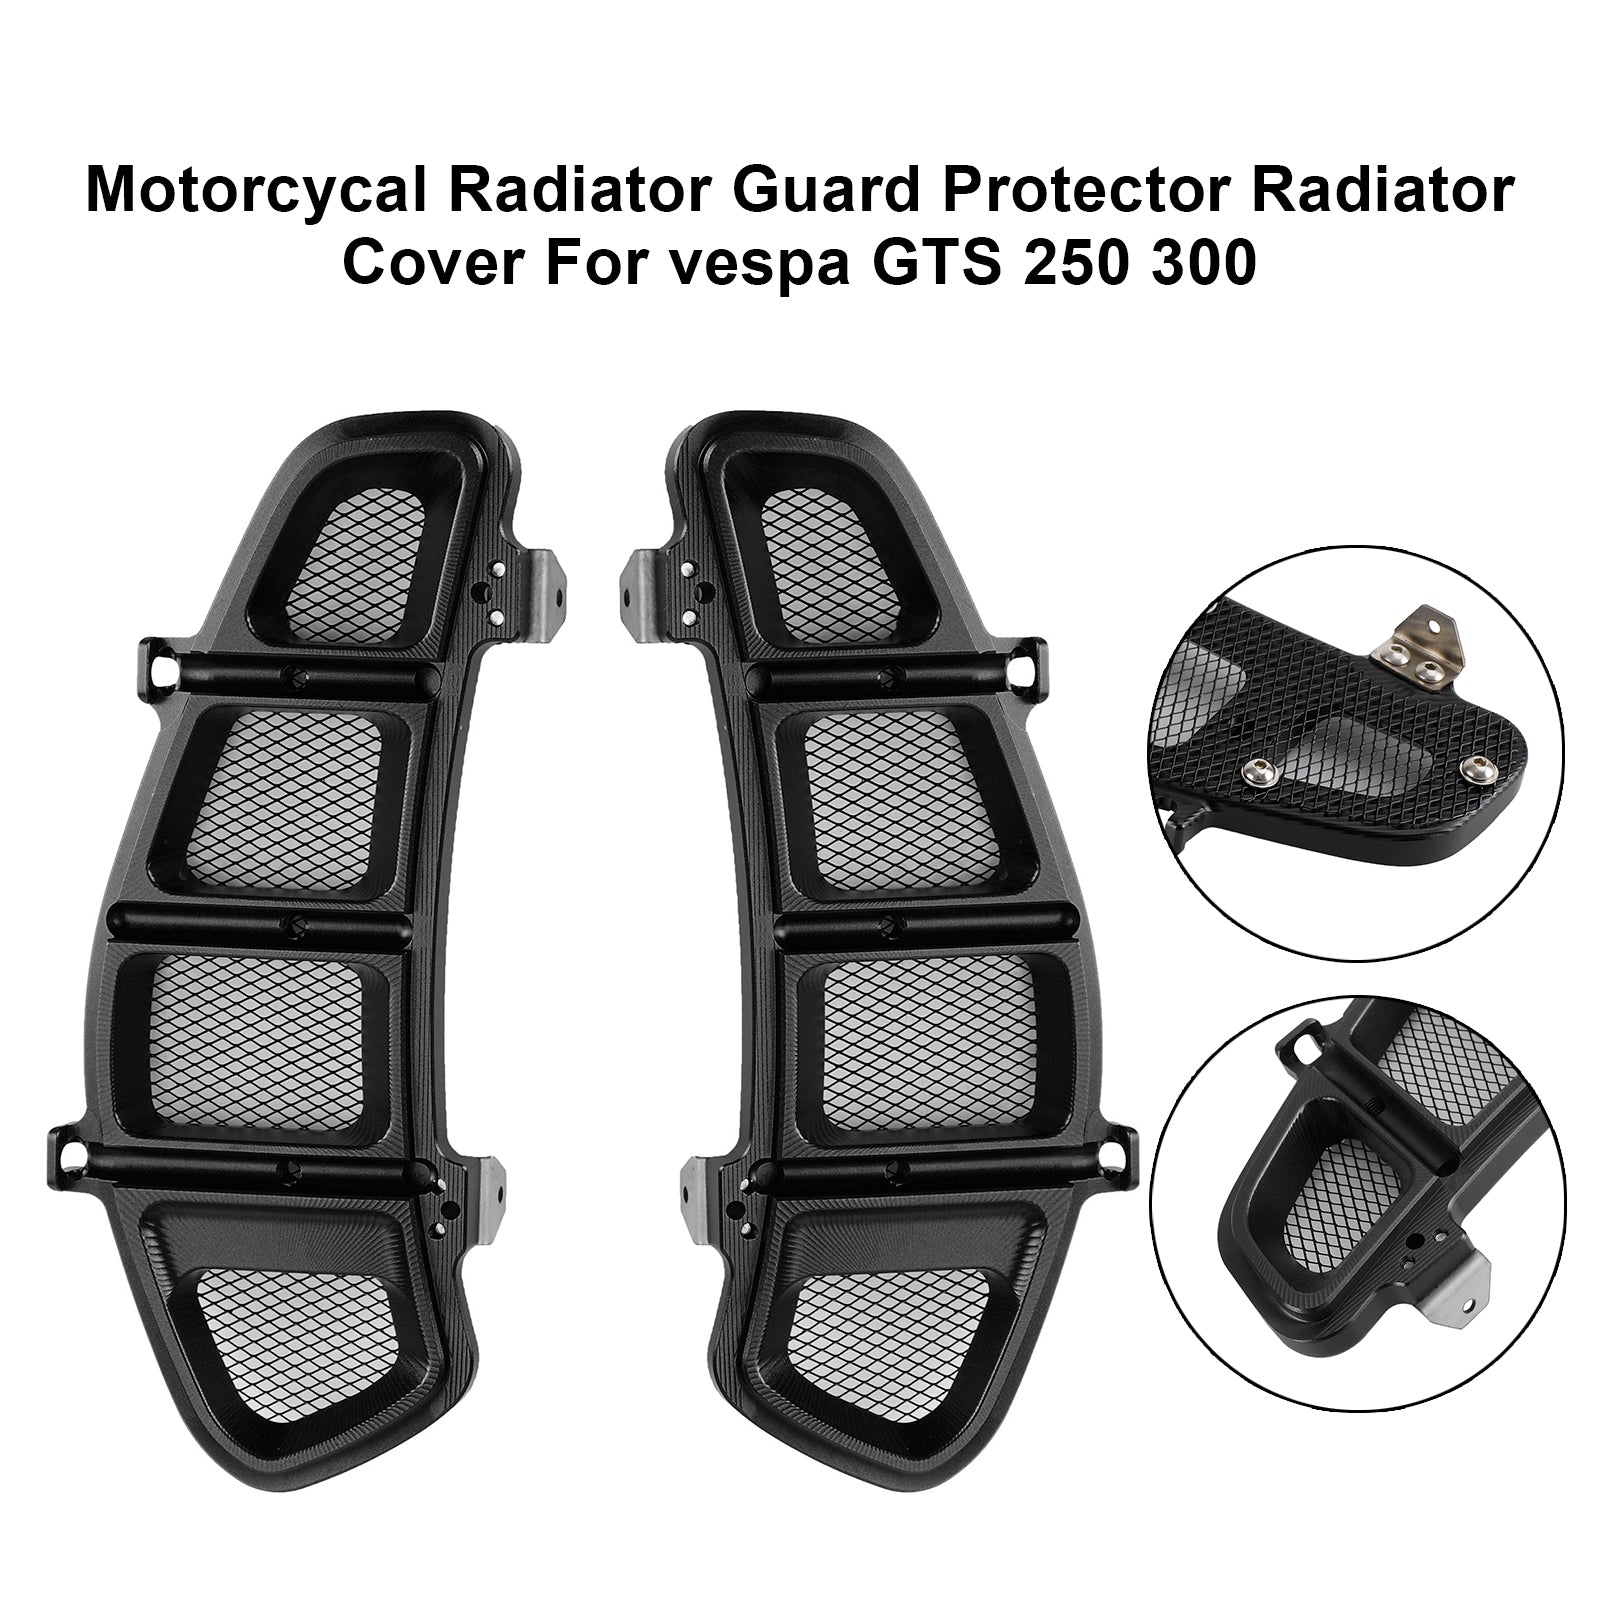 Radiator Guard Cover Protector Stainless Steel Fit For vespa GTS 250 300 Silver Generic